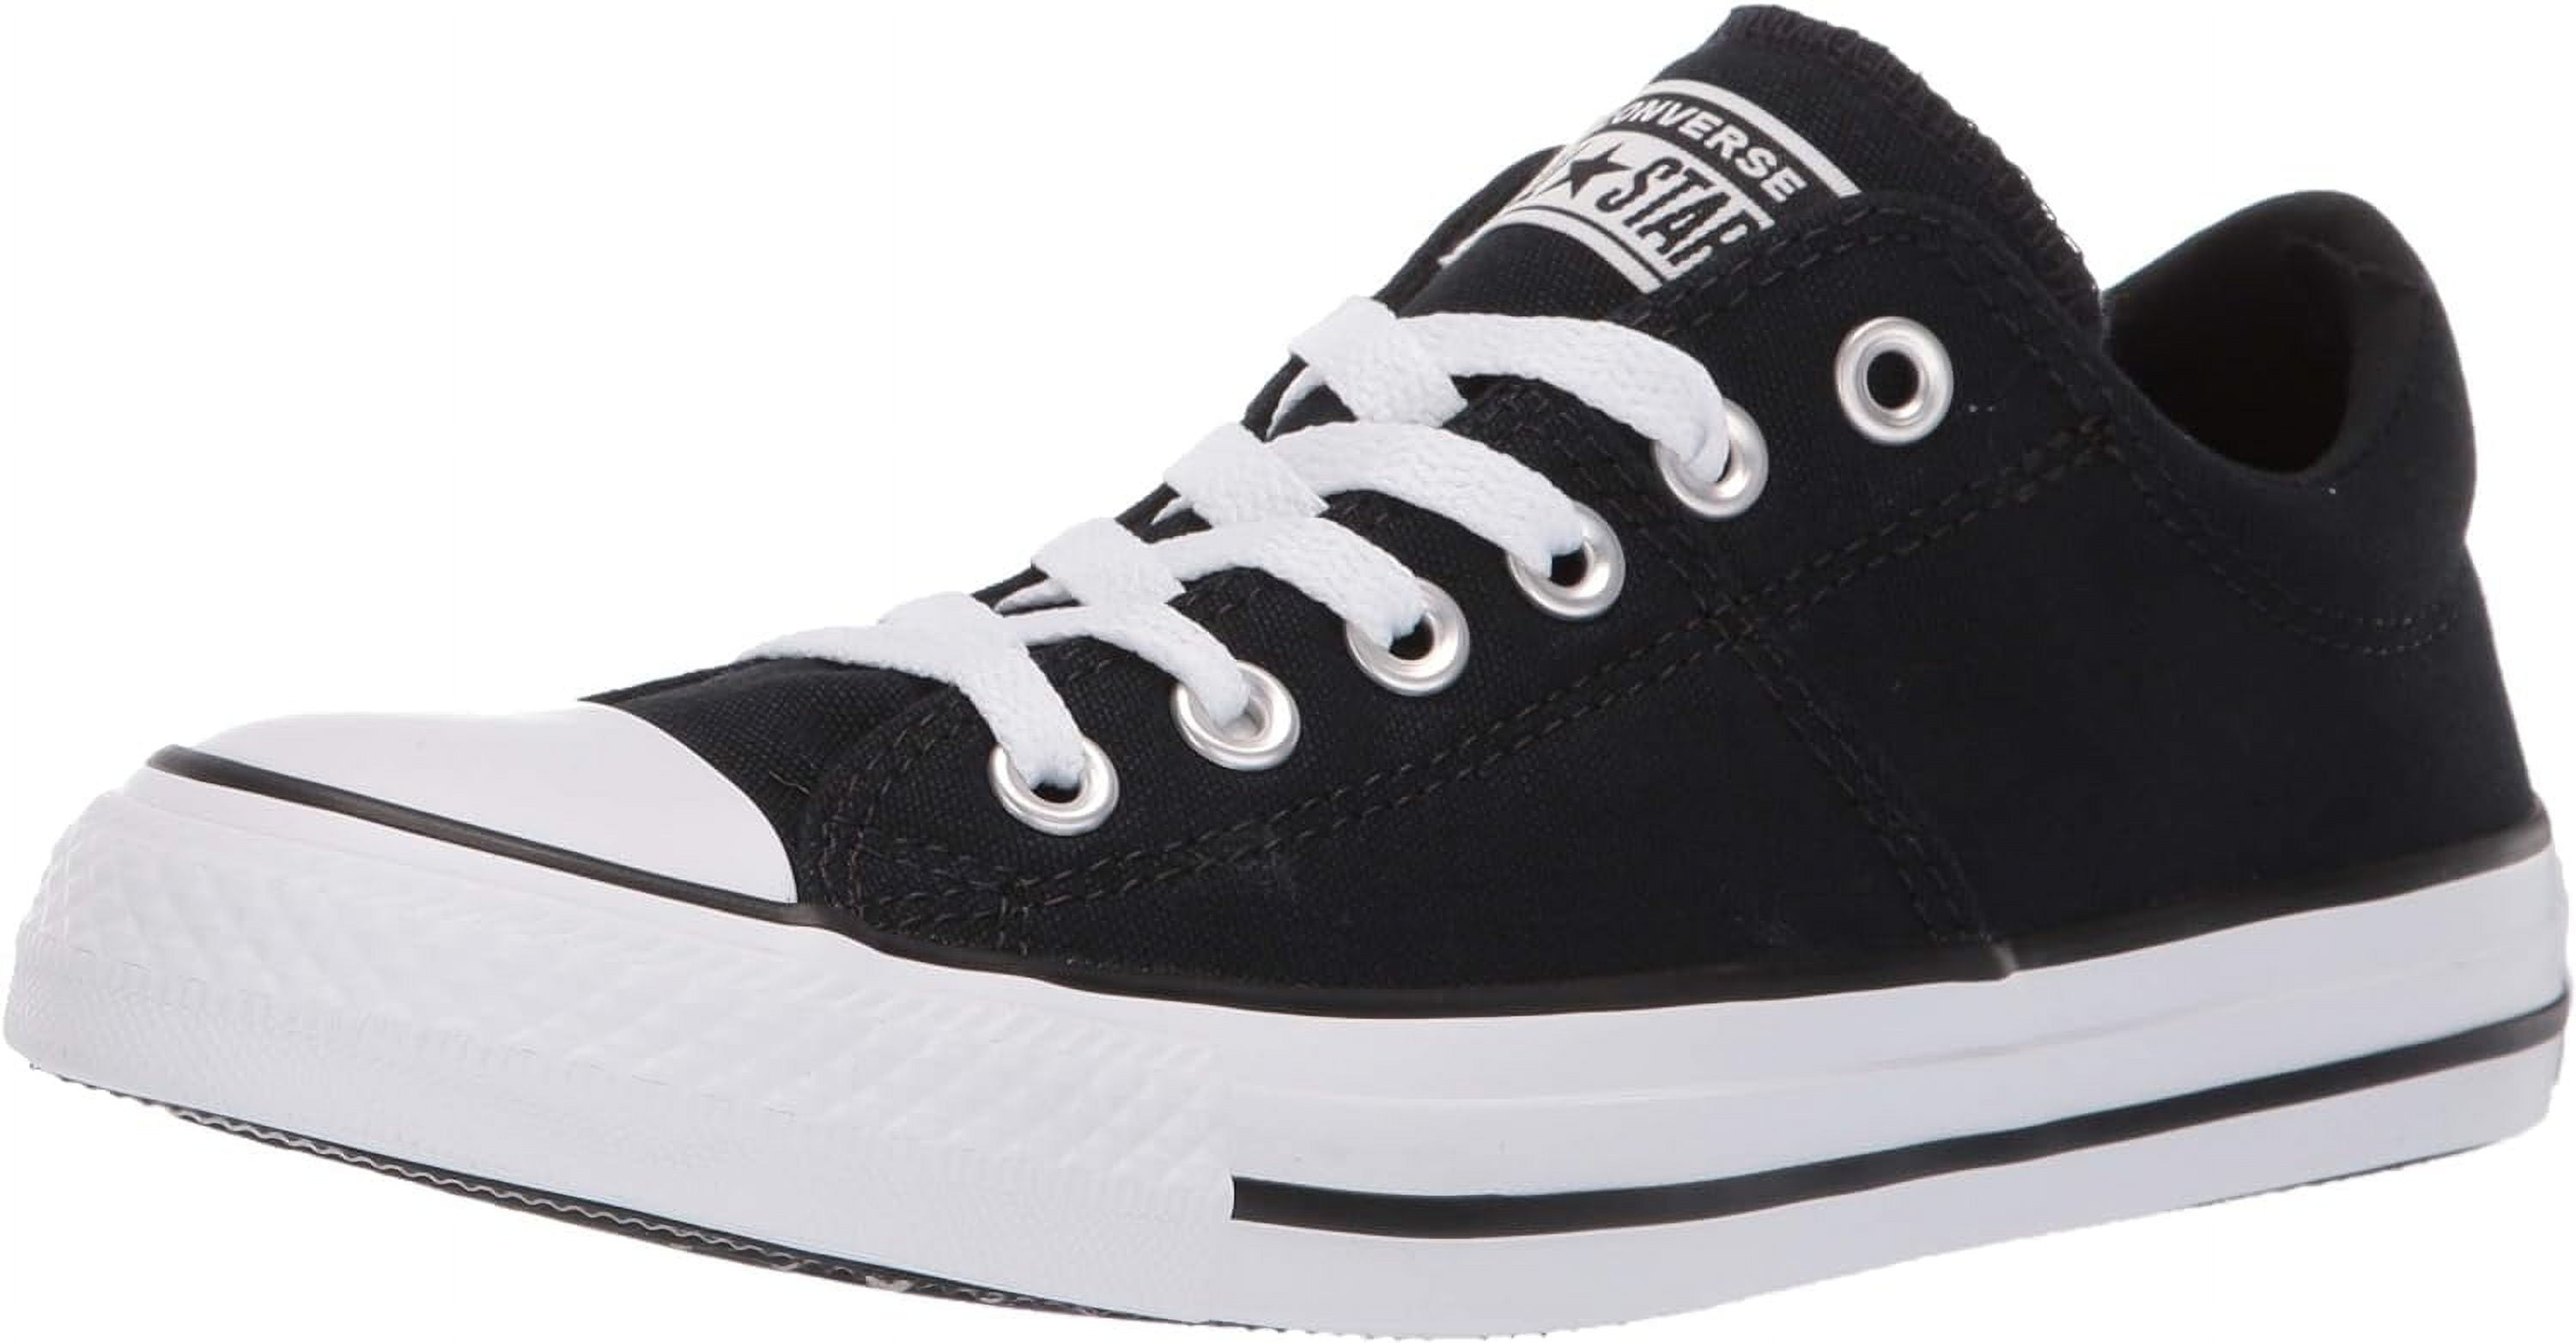 Converse Chuck Taylor All Star Specialty - Black Monochrome Leather